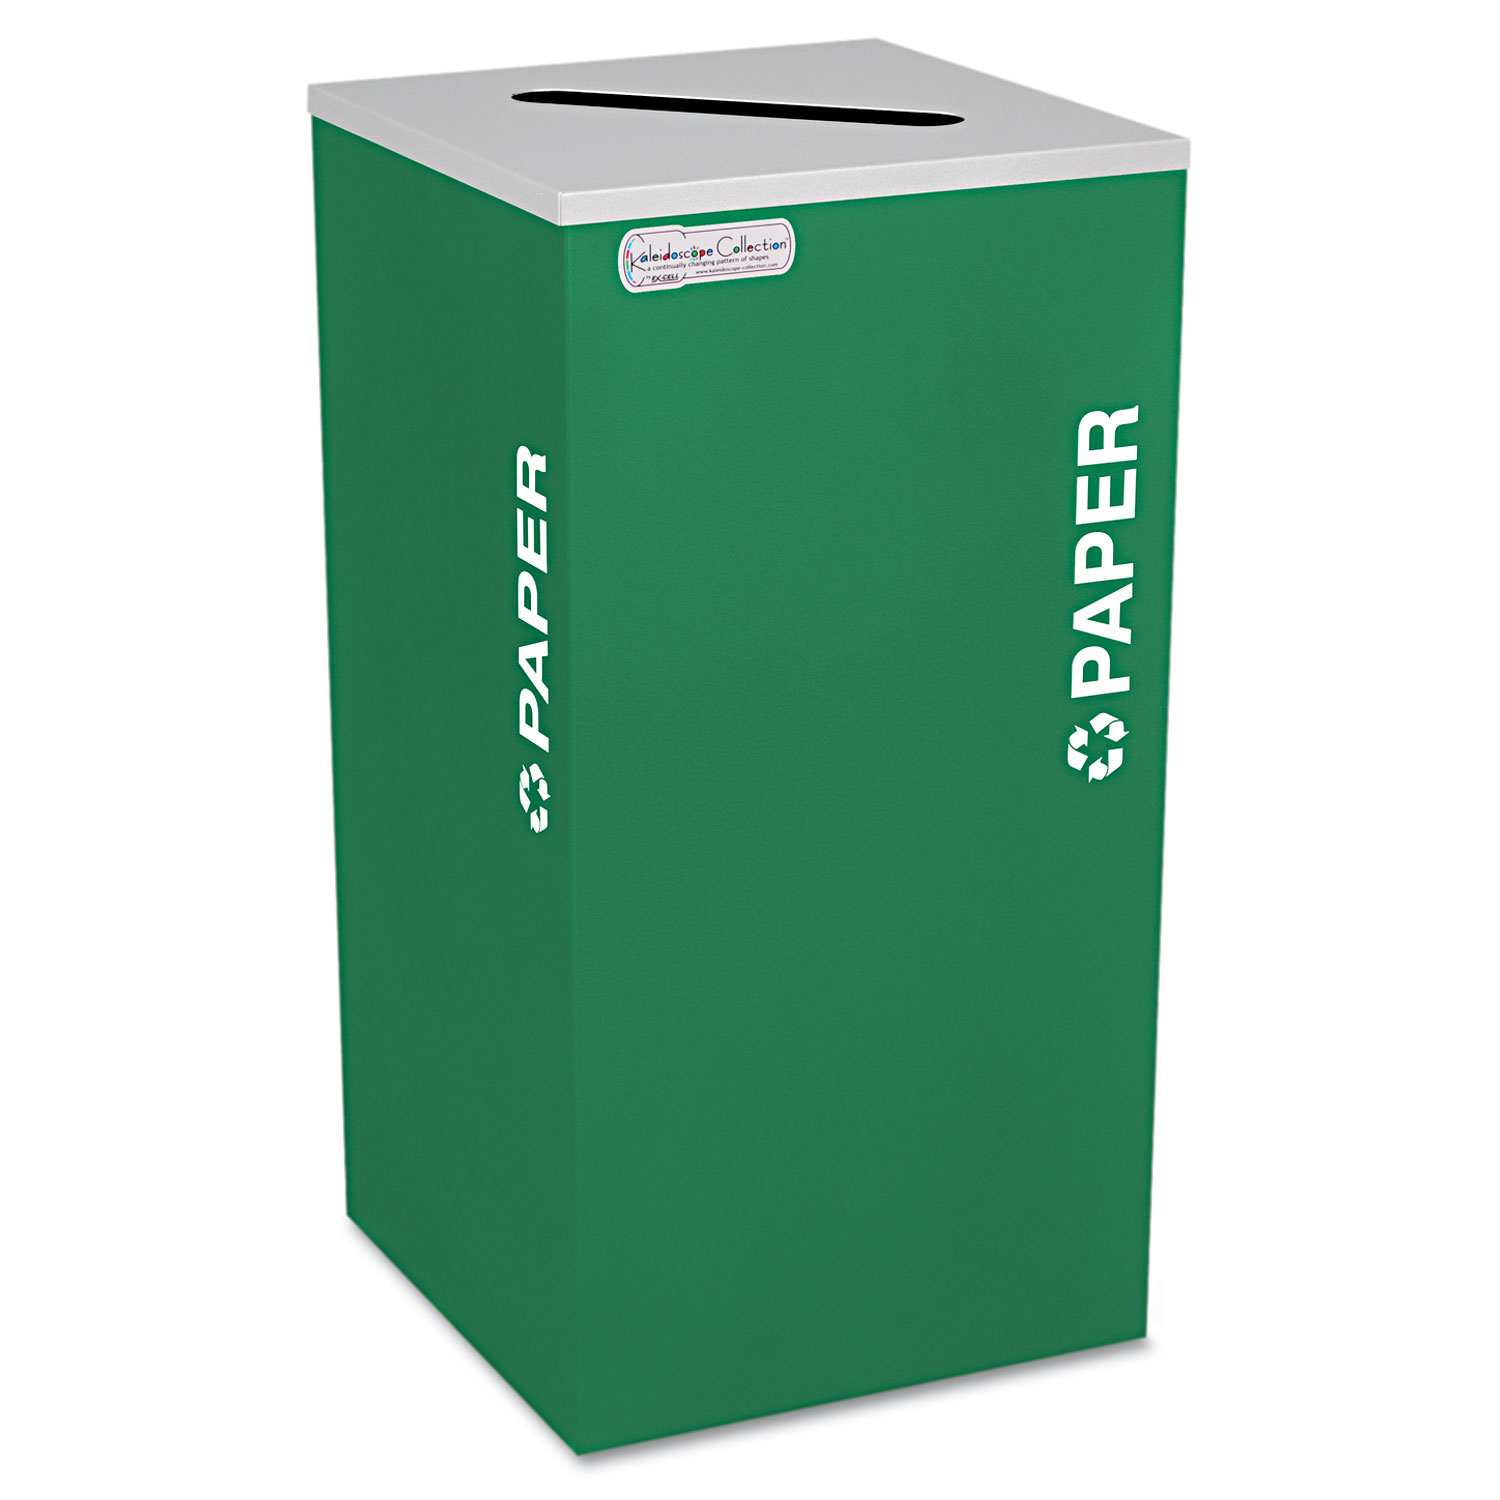 Kaleidoscope Collection Paper-Recycling Receptacle, 24gal, Emerald Green